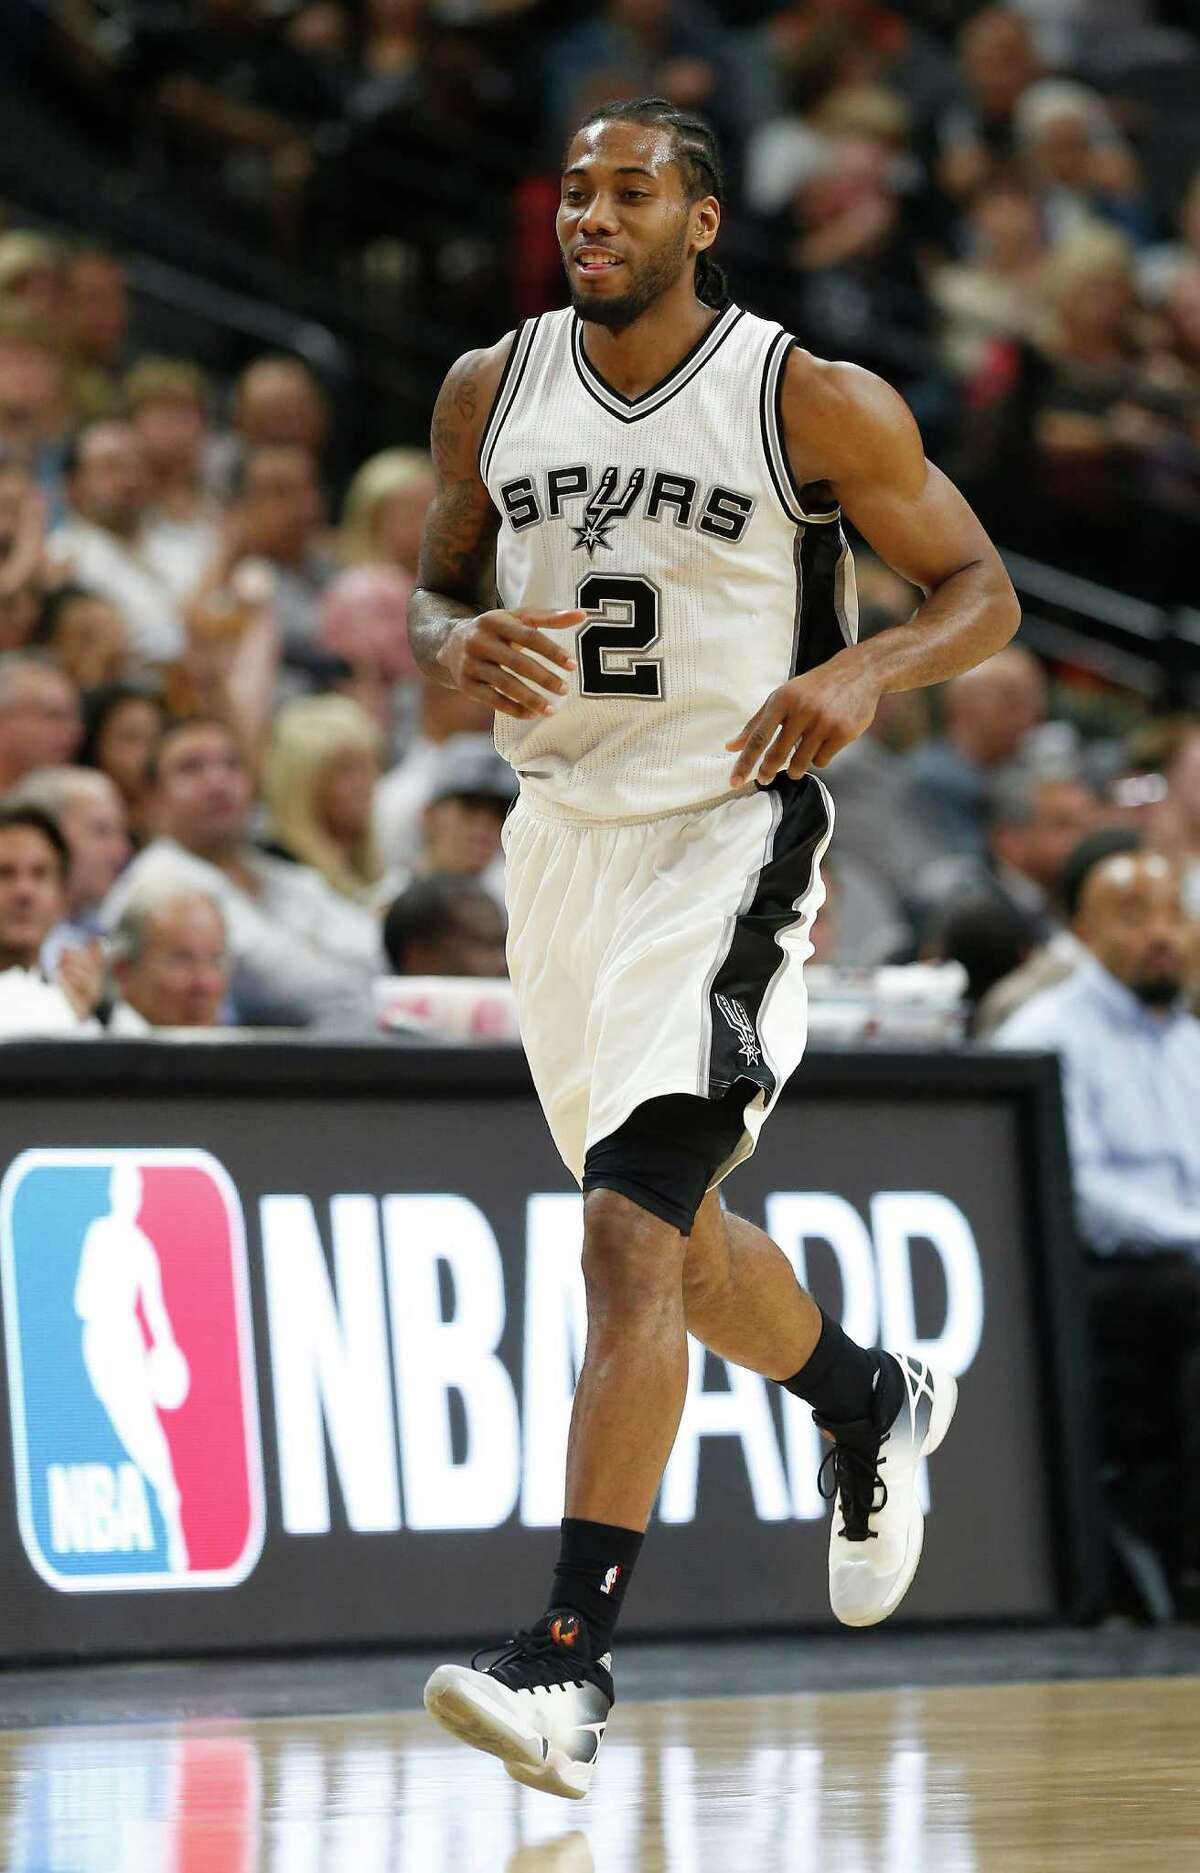 Spurs' Kawhi Leonard (02) smiles after scoring against the Detroit Pistons at the AT&T Center on Wednesday, Mar. 2, 2016. Spurs defeated the Pistons, 97-81. (Kin Man Hui/San Antonio Express-News)